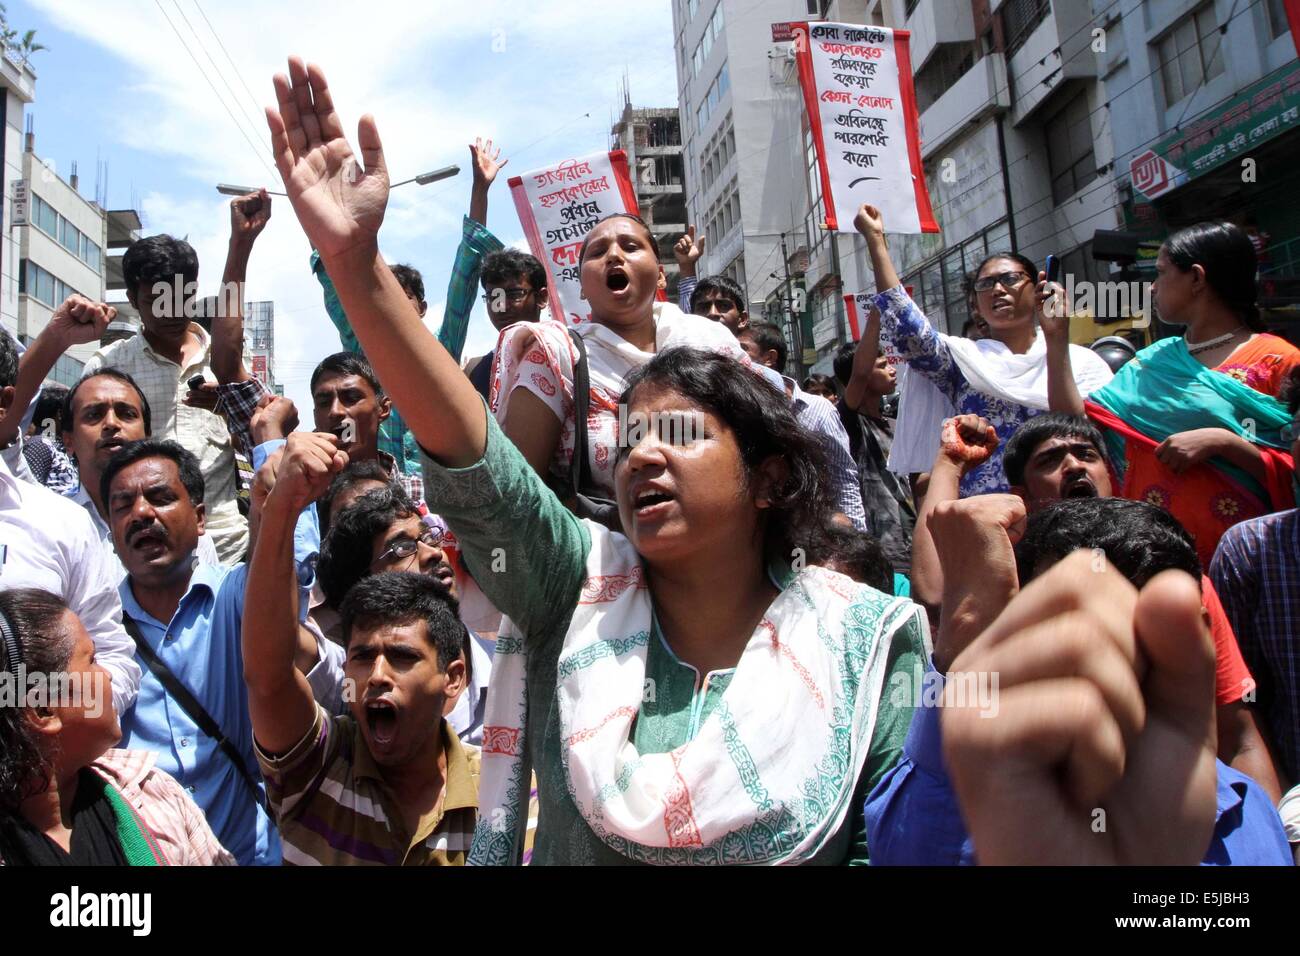 Dhaka, Bangladesh. 1st Aug, 2014. Bangladesh social activists and garment workers from the Tuba Group shout slogans during a protest against unpaid salaries, in Dhaka on August 2, 2014. Garment workers from the Tuba Group, on the sixth day of a hunger strike, are demanding three months unpaid salaries and Eid bonus. Stock Photo